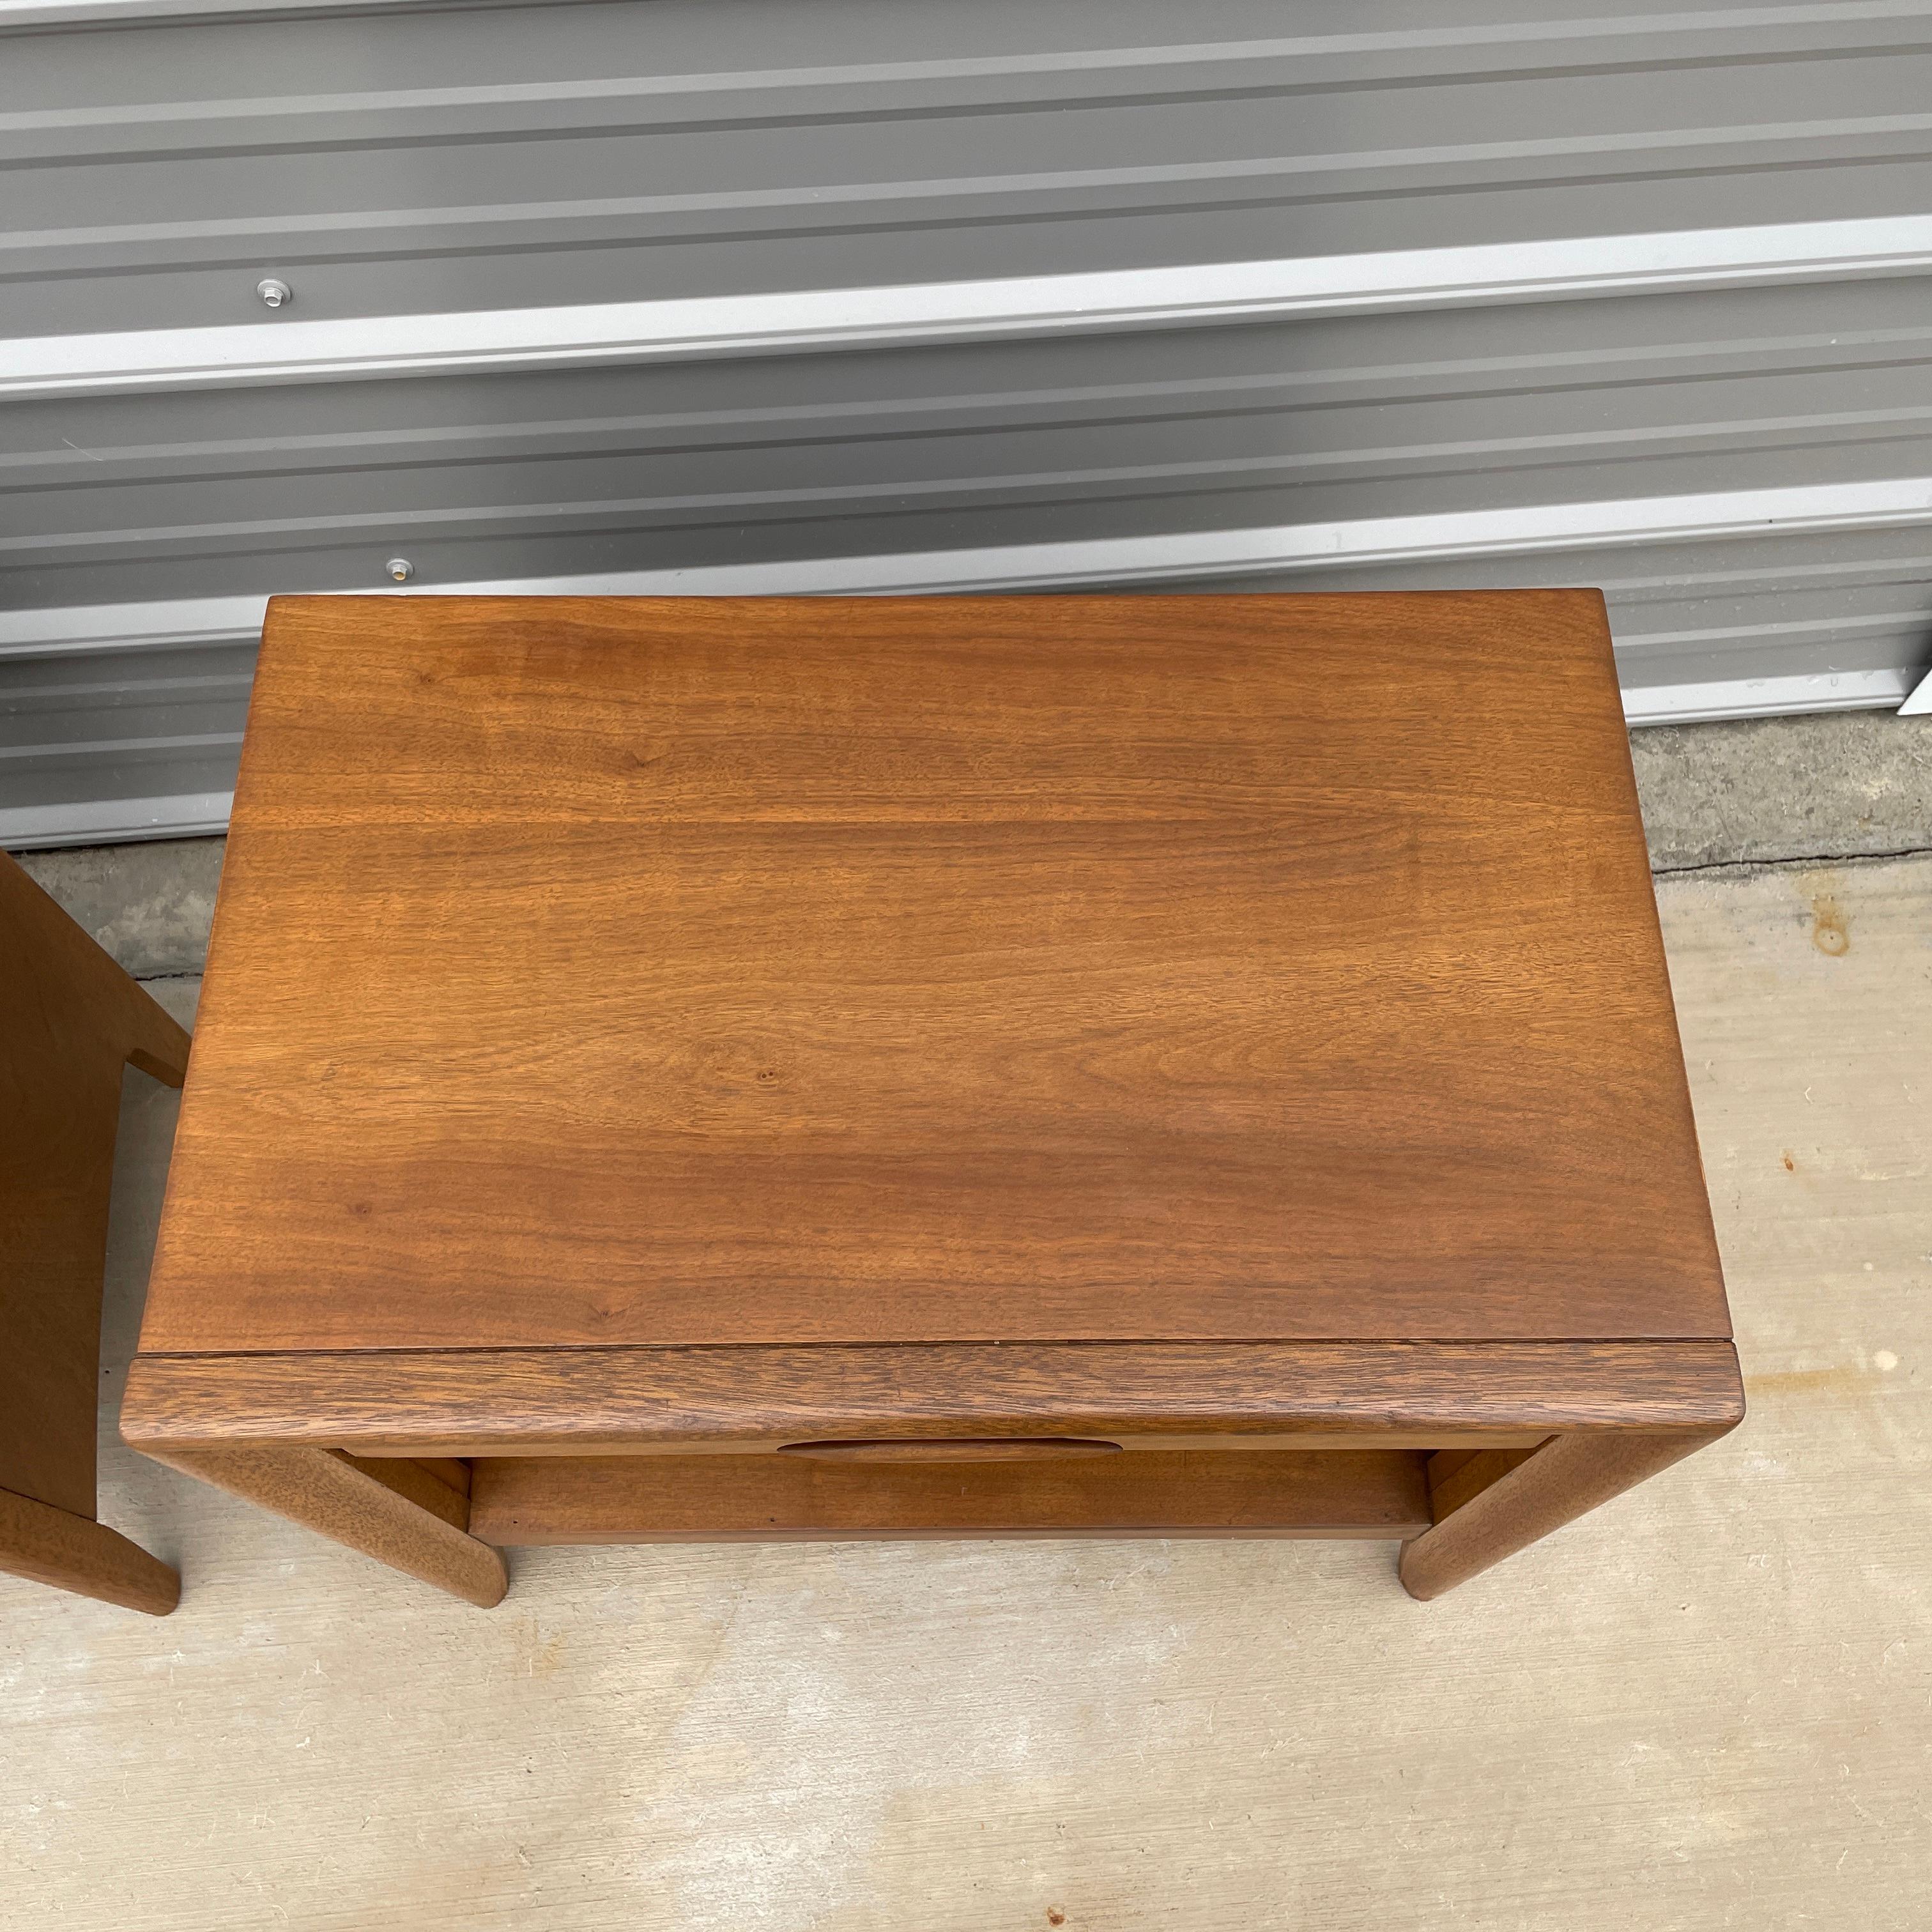 Recently professionally refinished pair of walnut Broyhill Emphasis nightstands are ready to get to work storing your bedside belongings. Refinished in a premium finish called Osmo oil. Repairs are simple, reach out with any questions post purchase